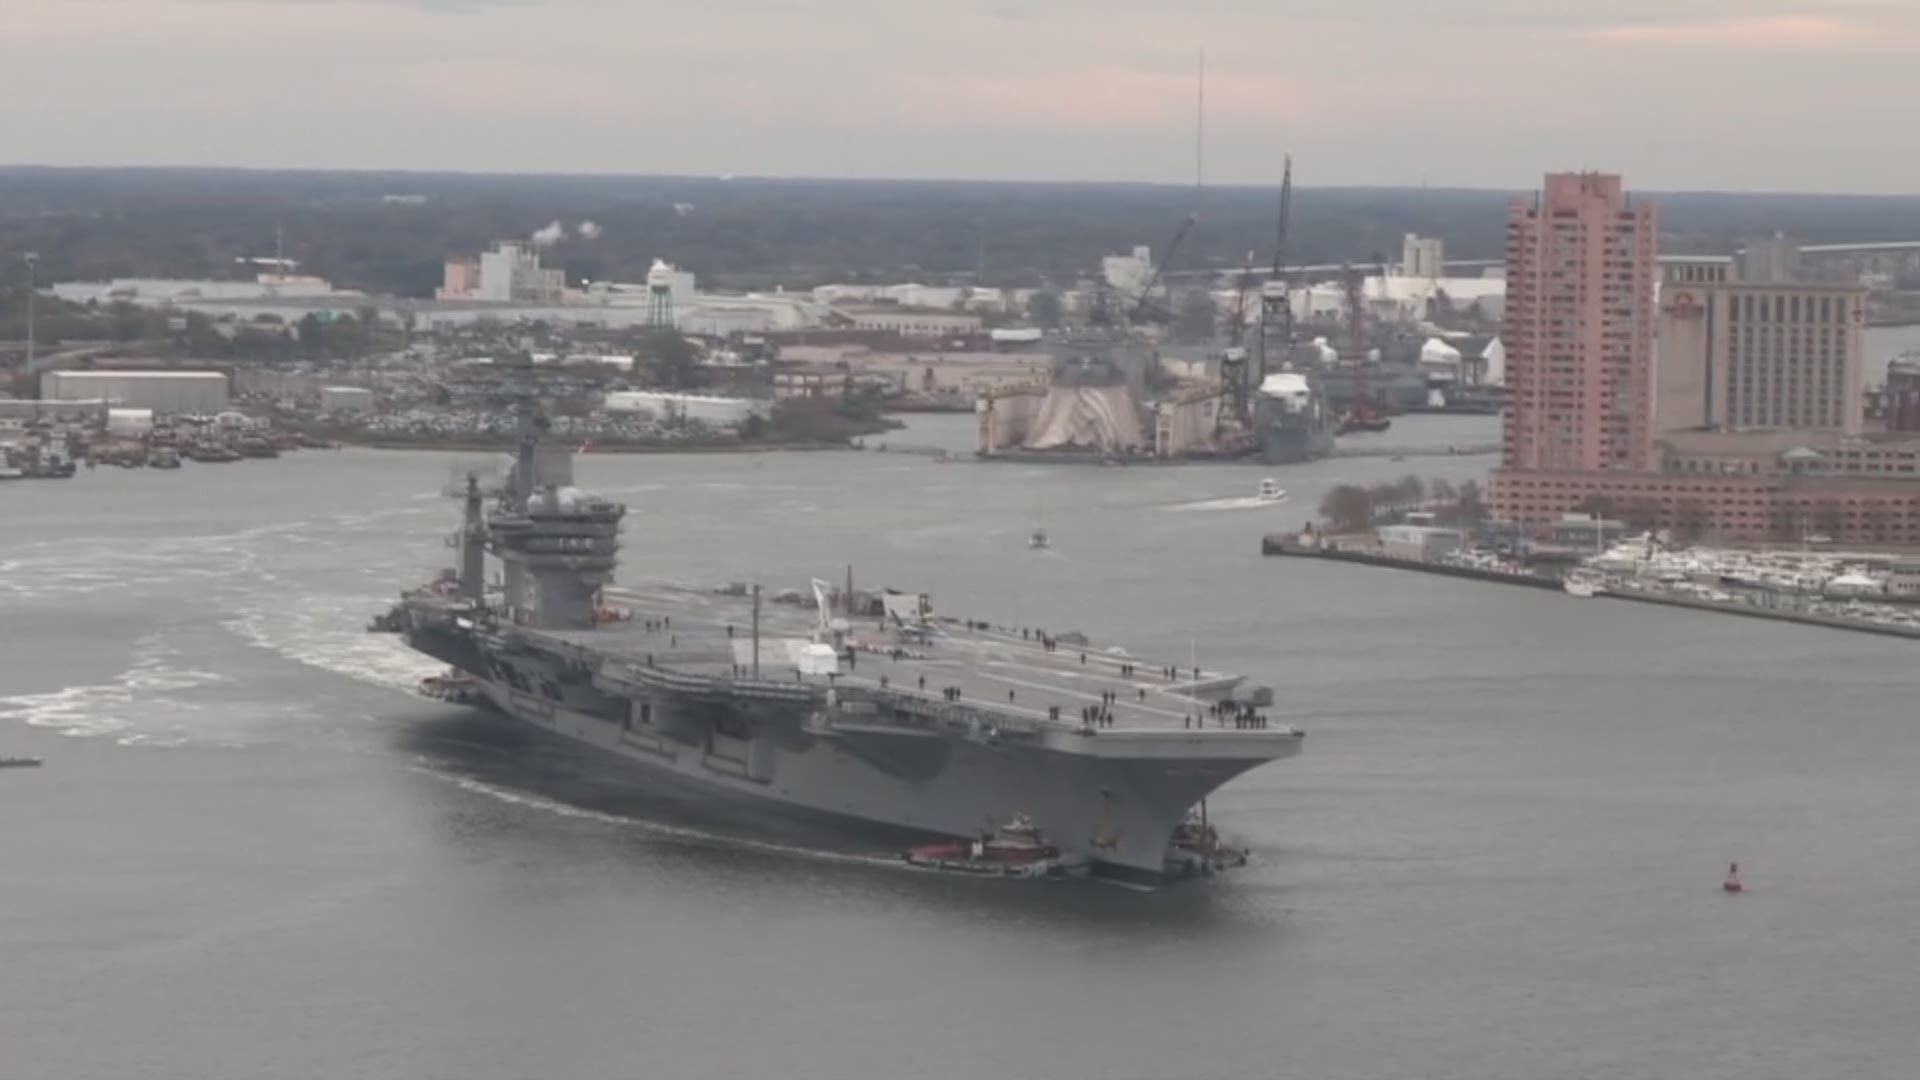 11/14/18: The USS Dwight D. Eisenhower is moved from Norfolk Naval Shipyard where it was undergoing maintenance back to its homeport at Naval Station Norfolk.